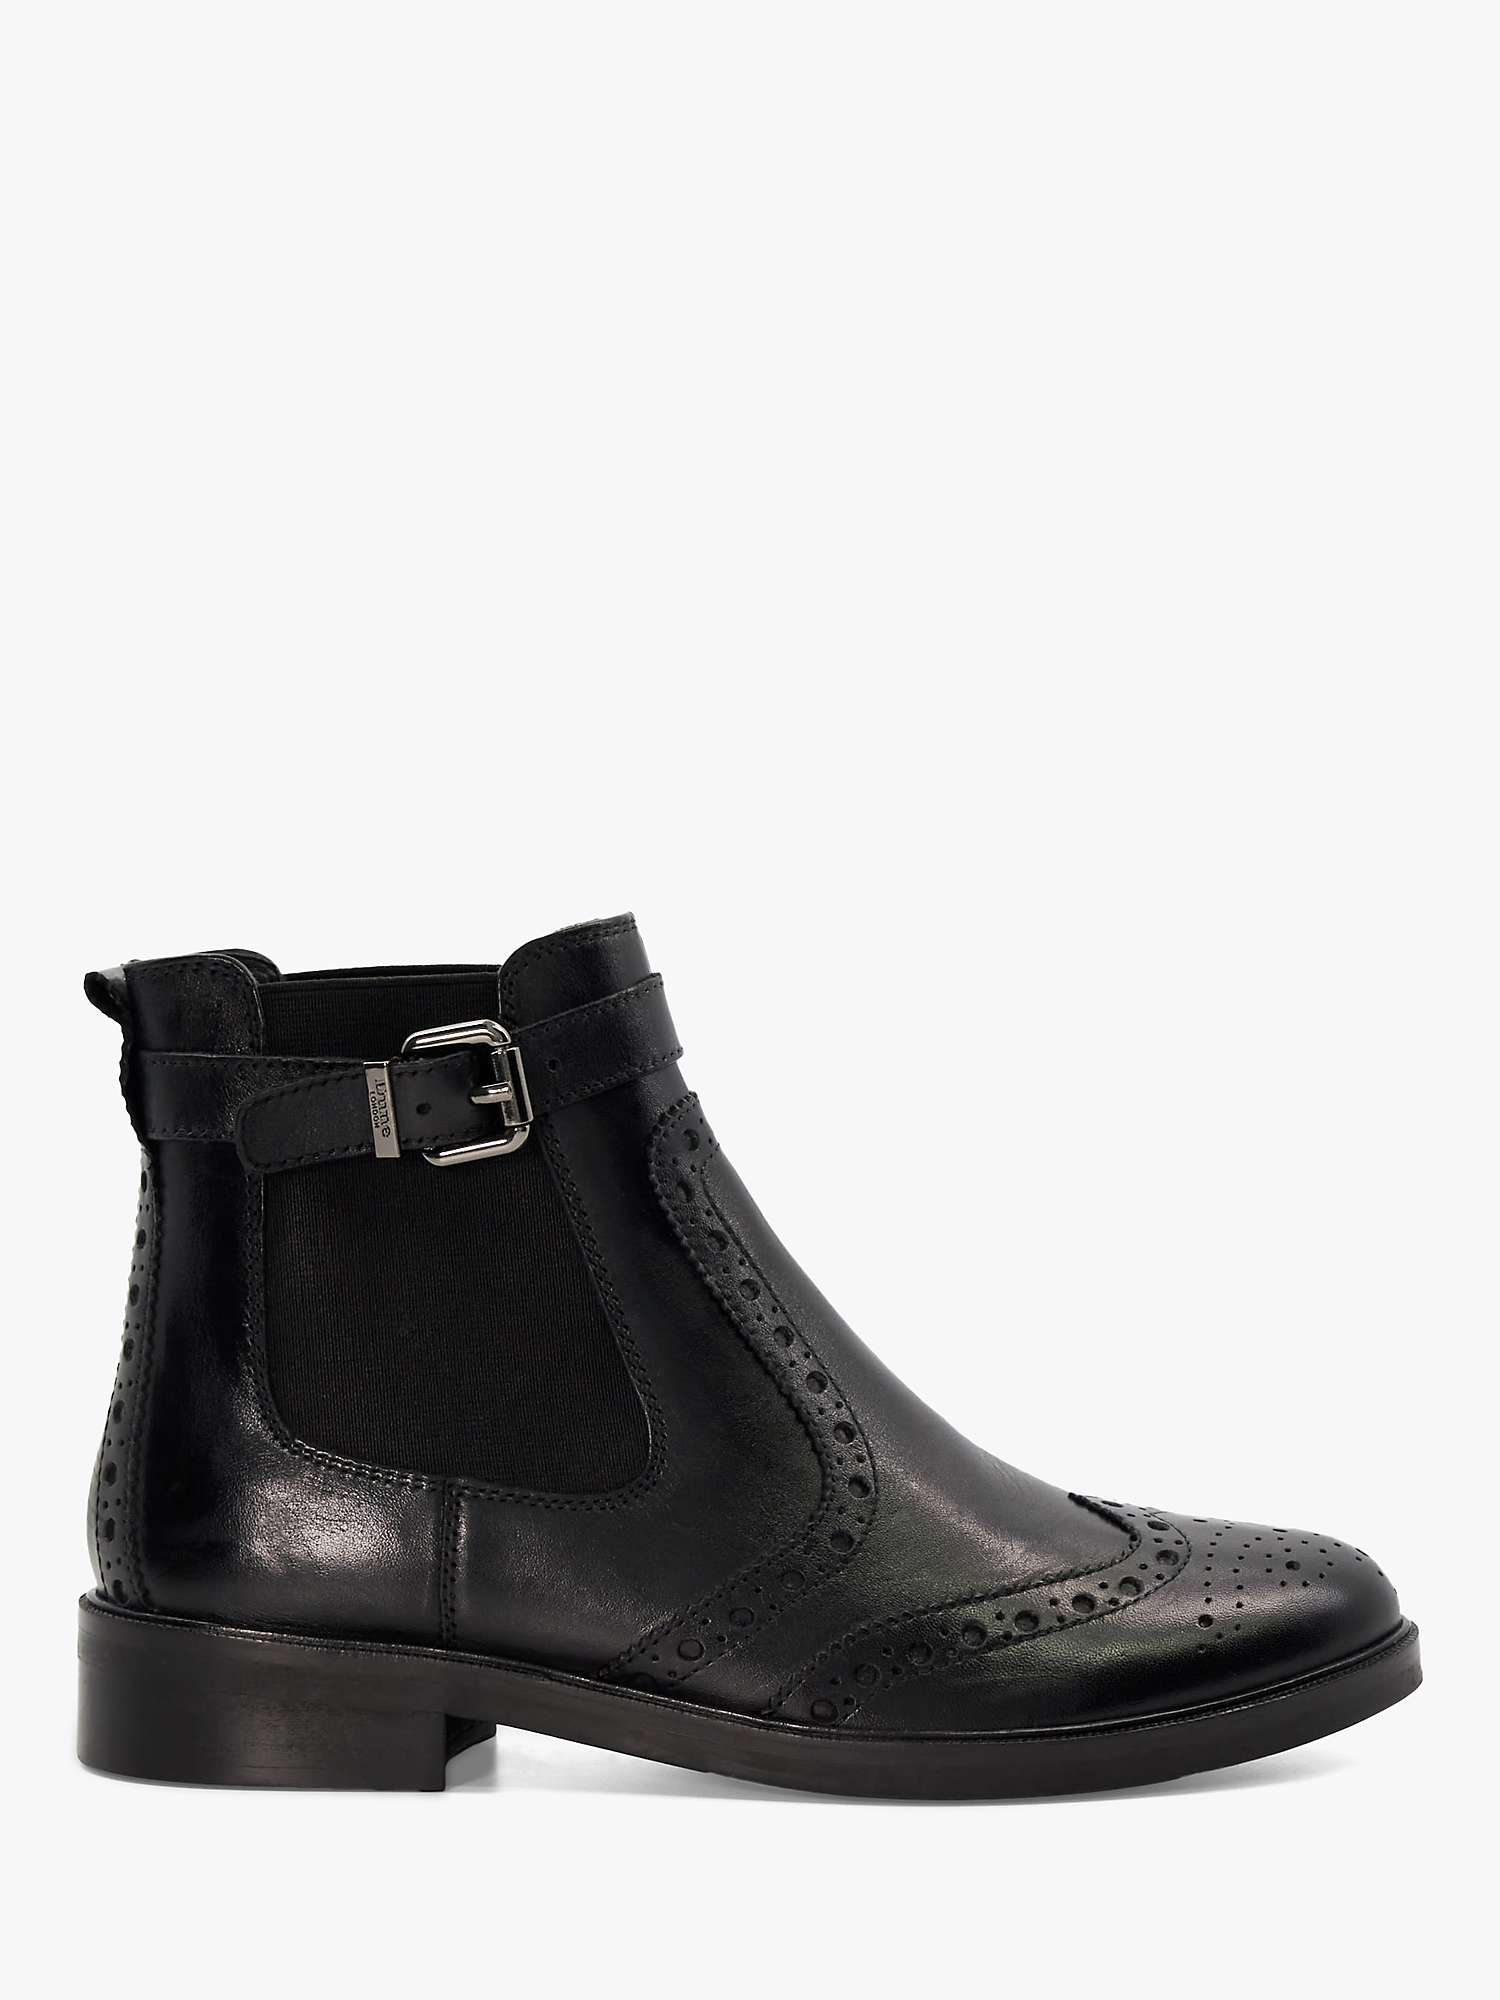 Buy Dune Question Leather Buckle Ankle Boots Online at johnlewis.com